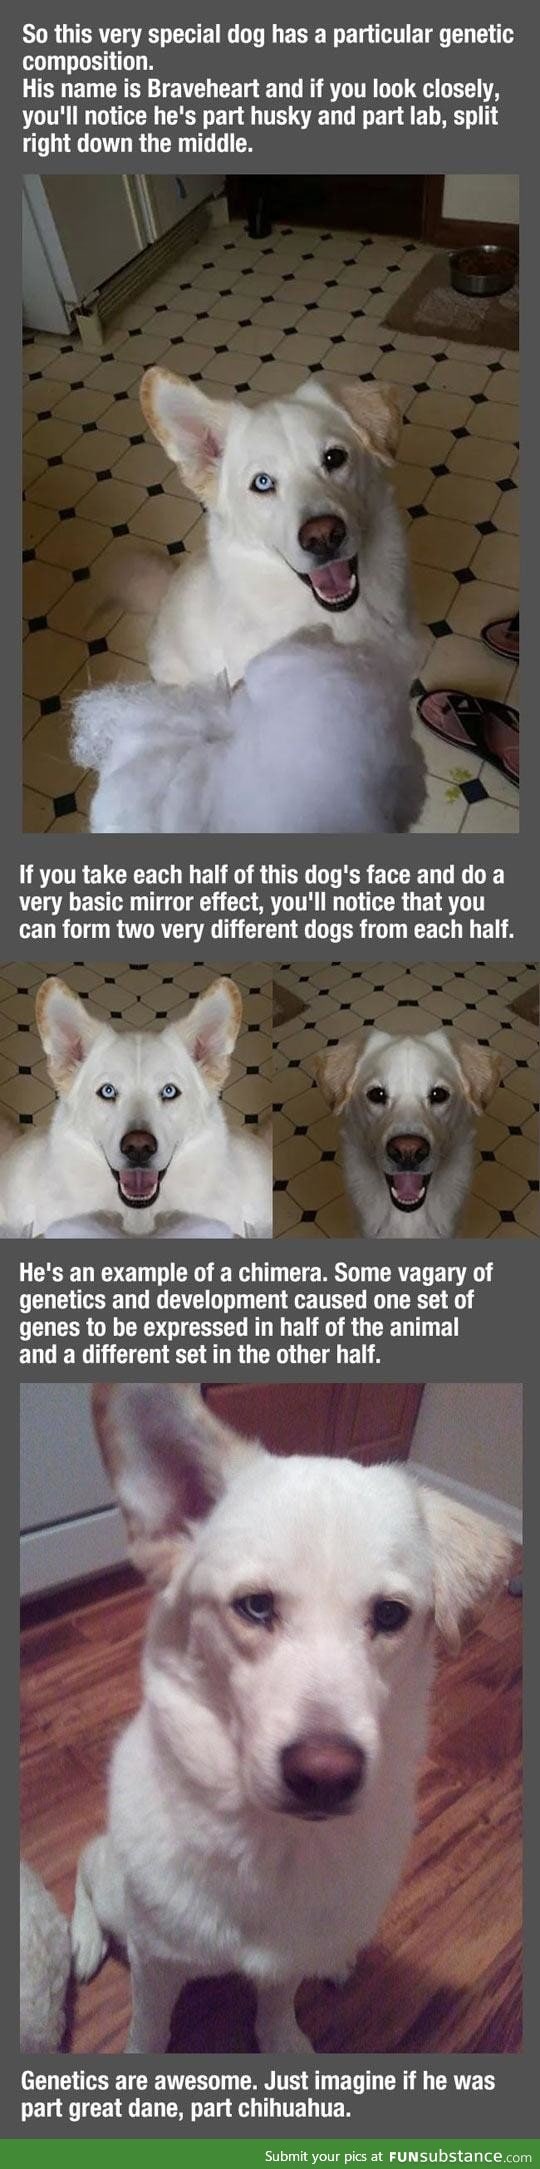 Genetics are awesome